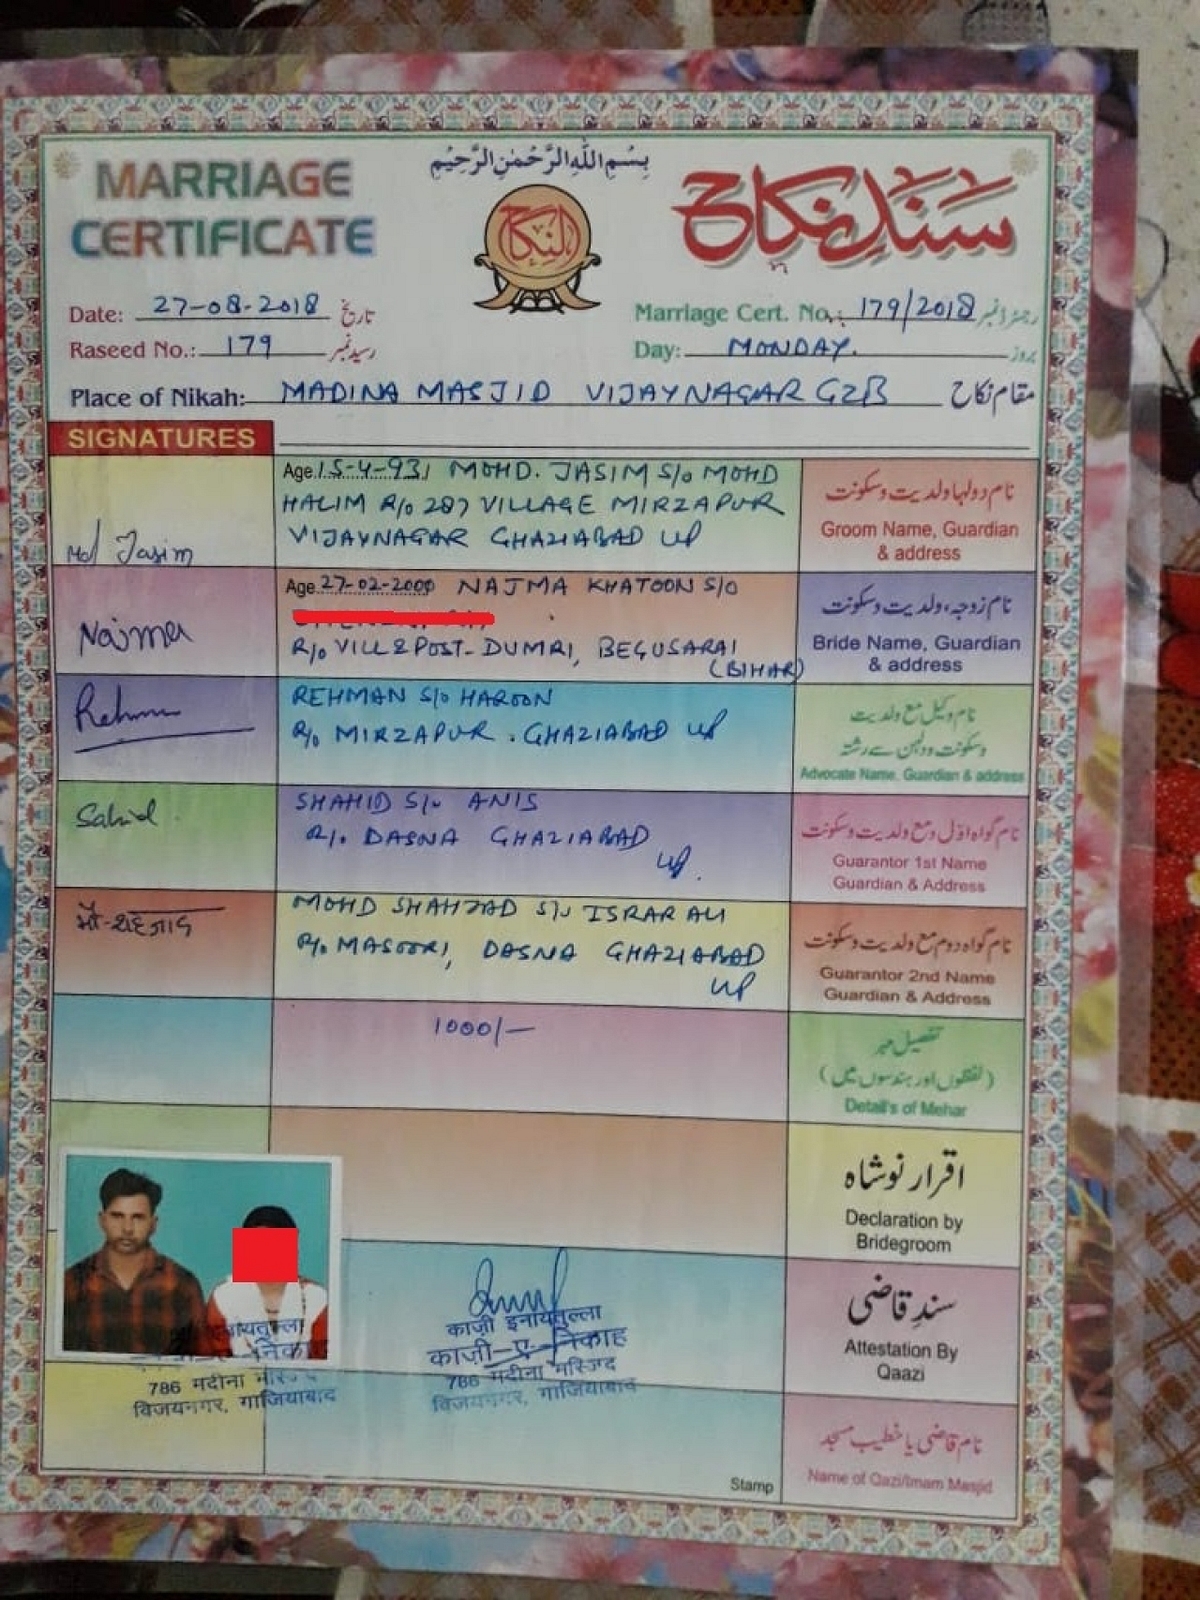 The conversion certificate of the alleged abducted minor circulated via WhatsApp by the tutor/accused.